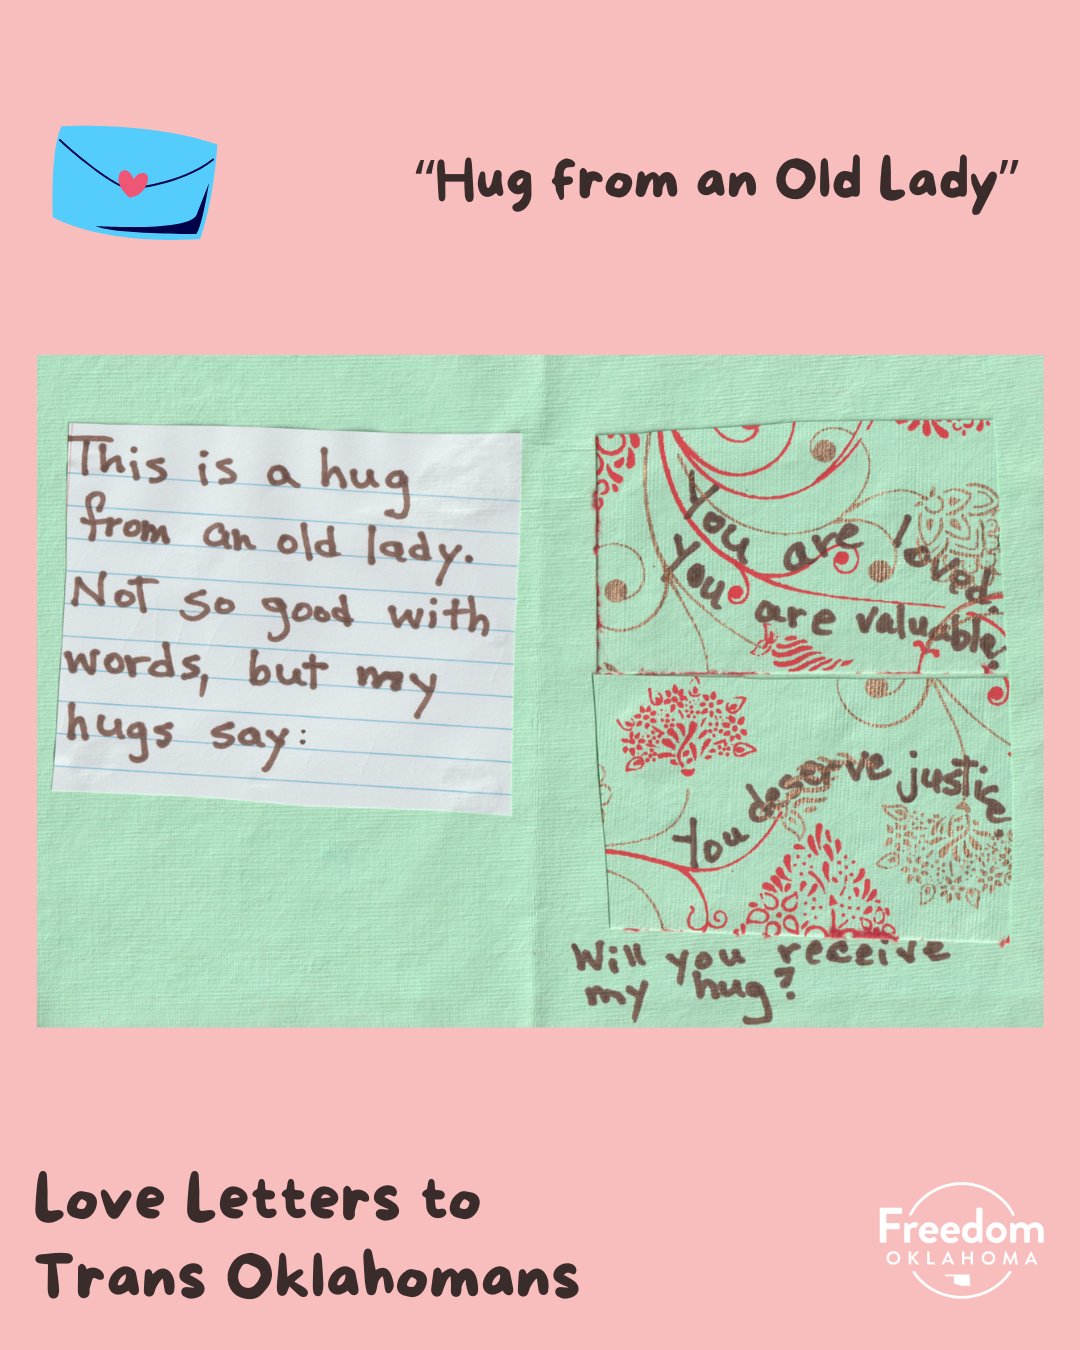  Similar pink graphic with artwork in the center: Piece titled "Hug from an Old Lady." Green piece of paper with a white notecard glued to the left that reads "This is a hug from an old lady. Not so good with words, but my hugs say:" &nbsp;  On the r